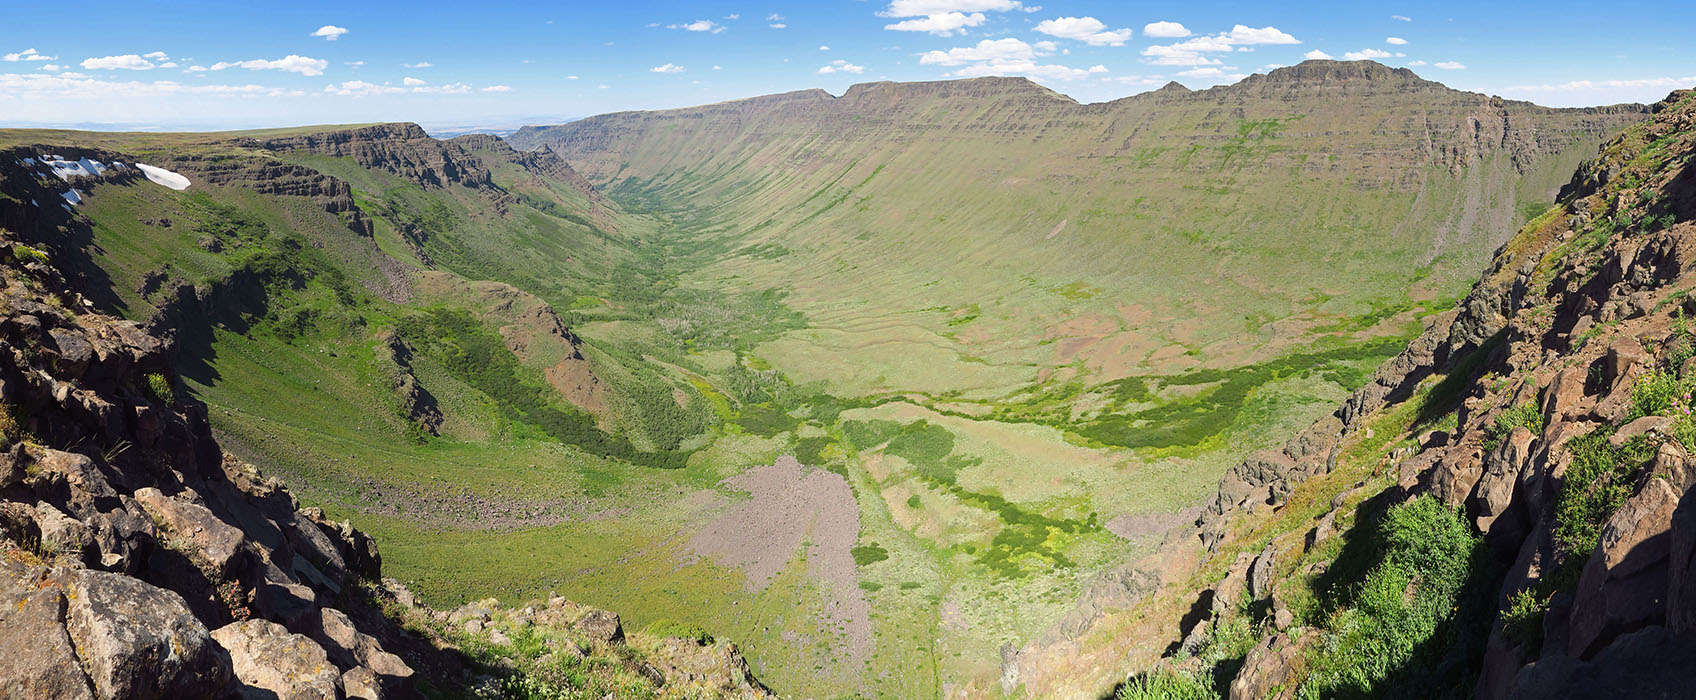 Kiger Gorge panorama [Kiger Gorge Overlook, Steens Mountain, Harney County, Oregon]